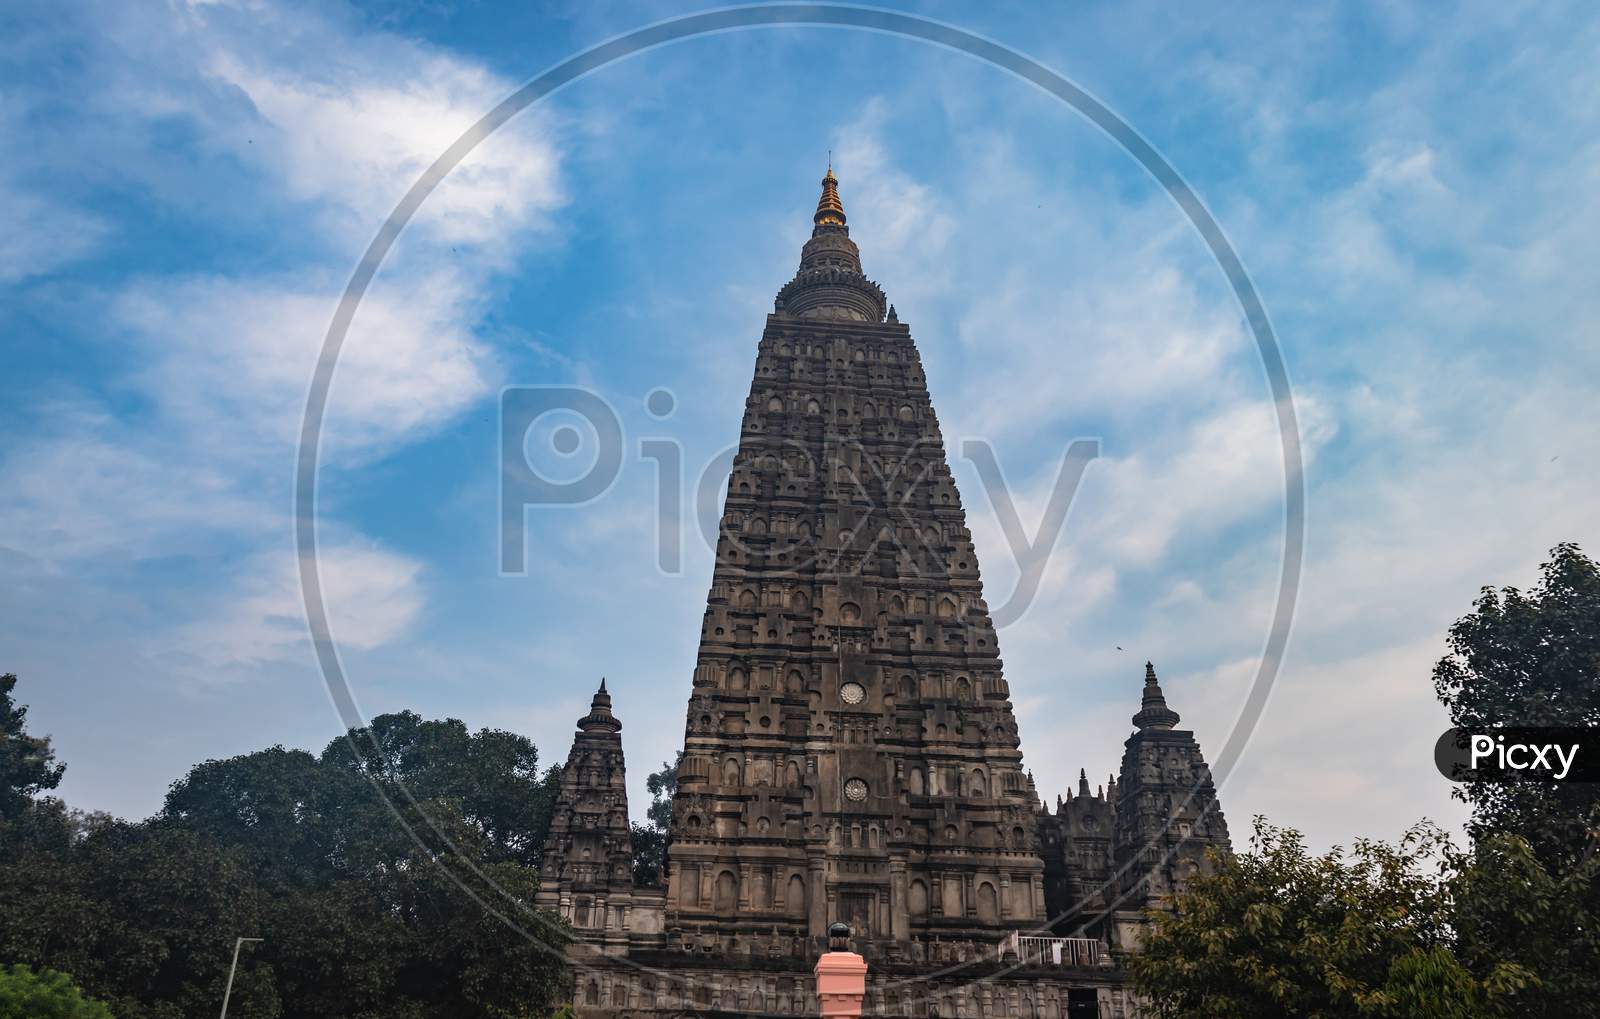 Mahabodhi Temple Isolated With Bright Sky And Unique Prospective Image Is Taken At Mahabodhi Temple Bodh Gaya Bihar India On 15 Mar 2020. It Is The Enlightened Place Of Grate Budha.